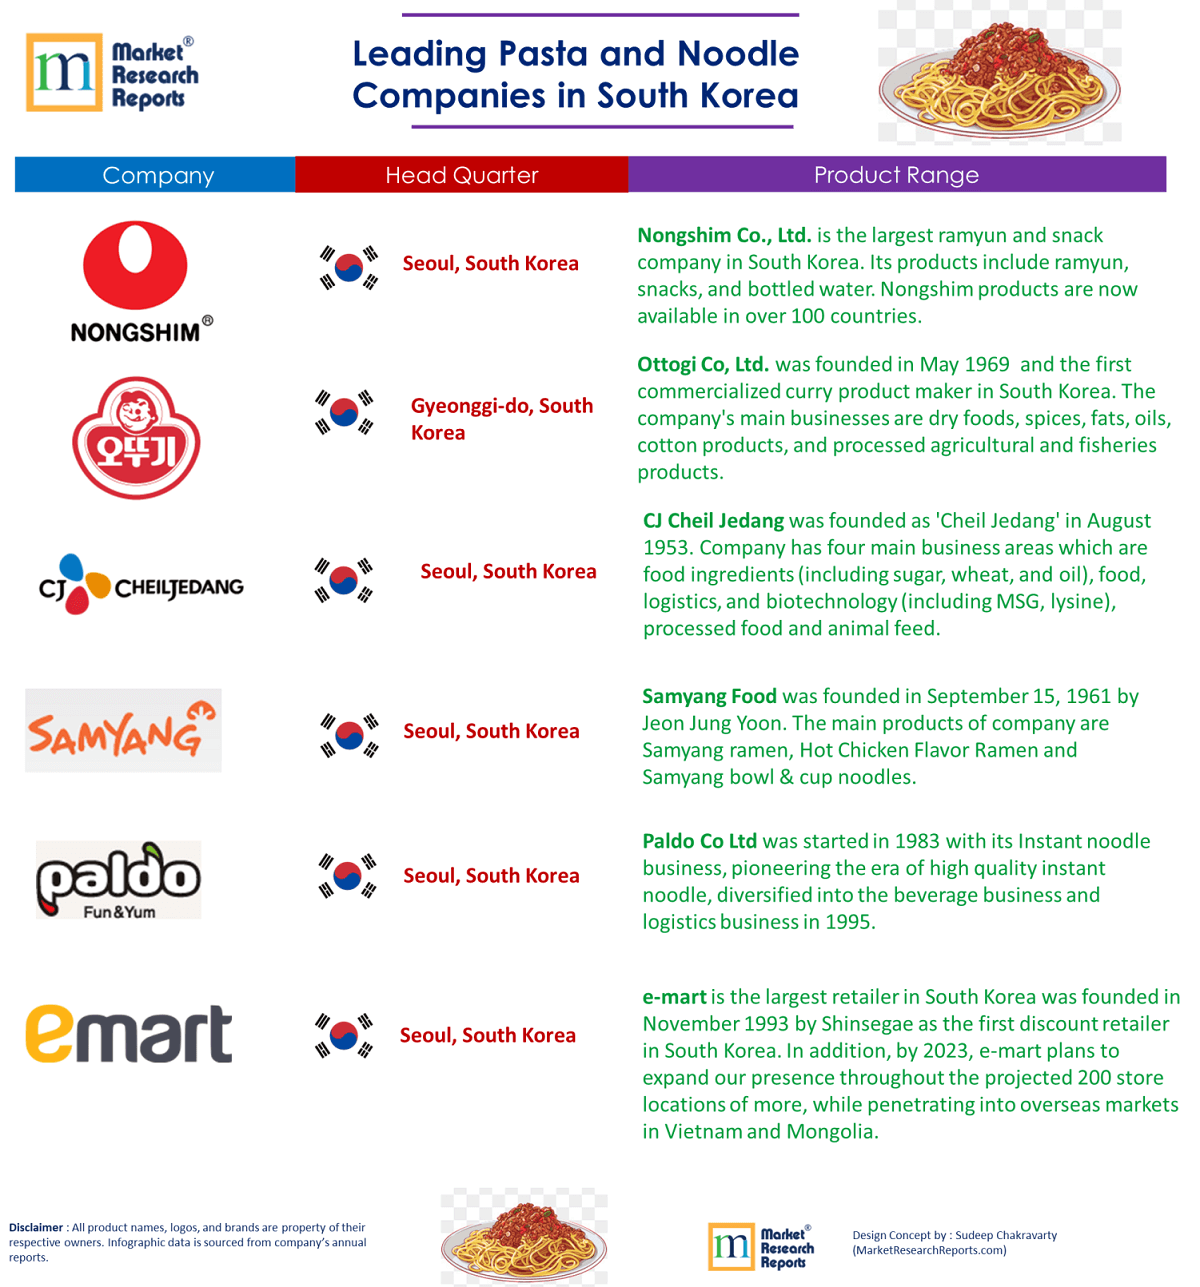 Top Pasta and Noodle Companies in South Korea